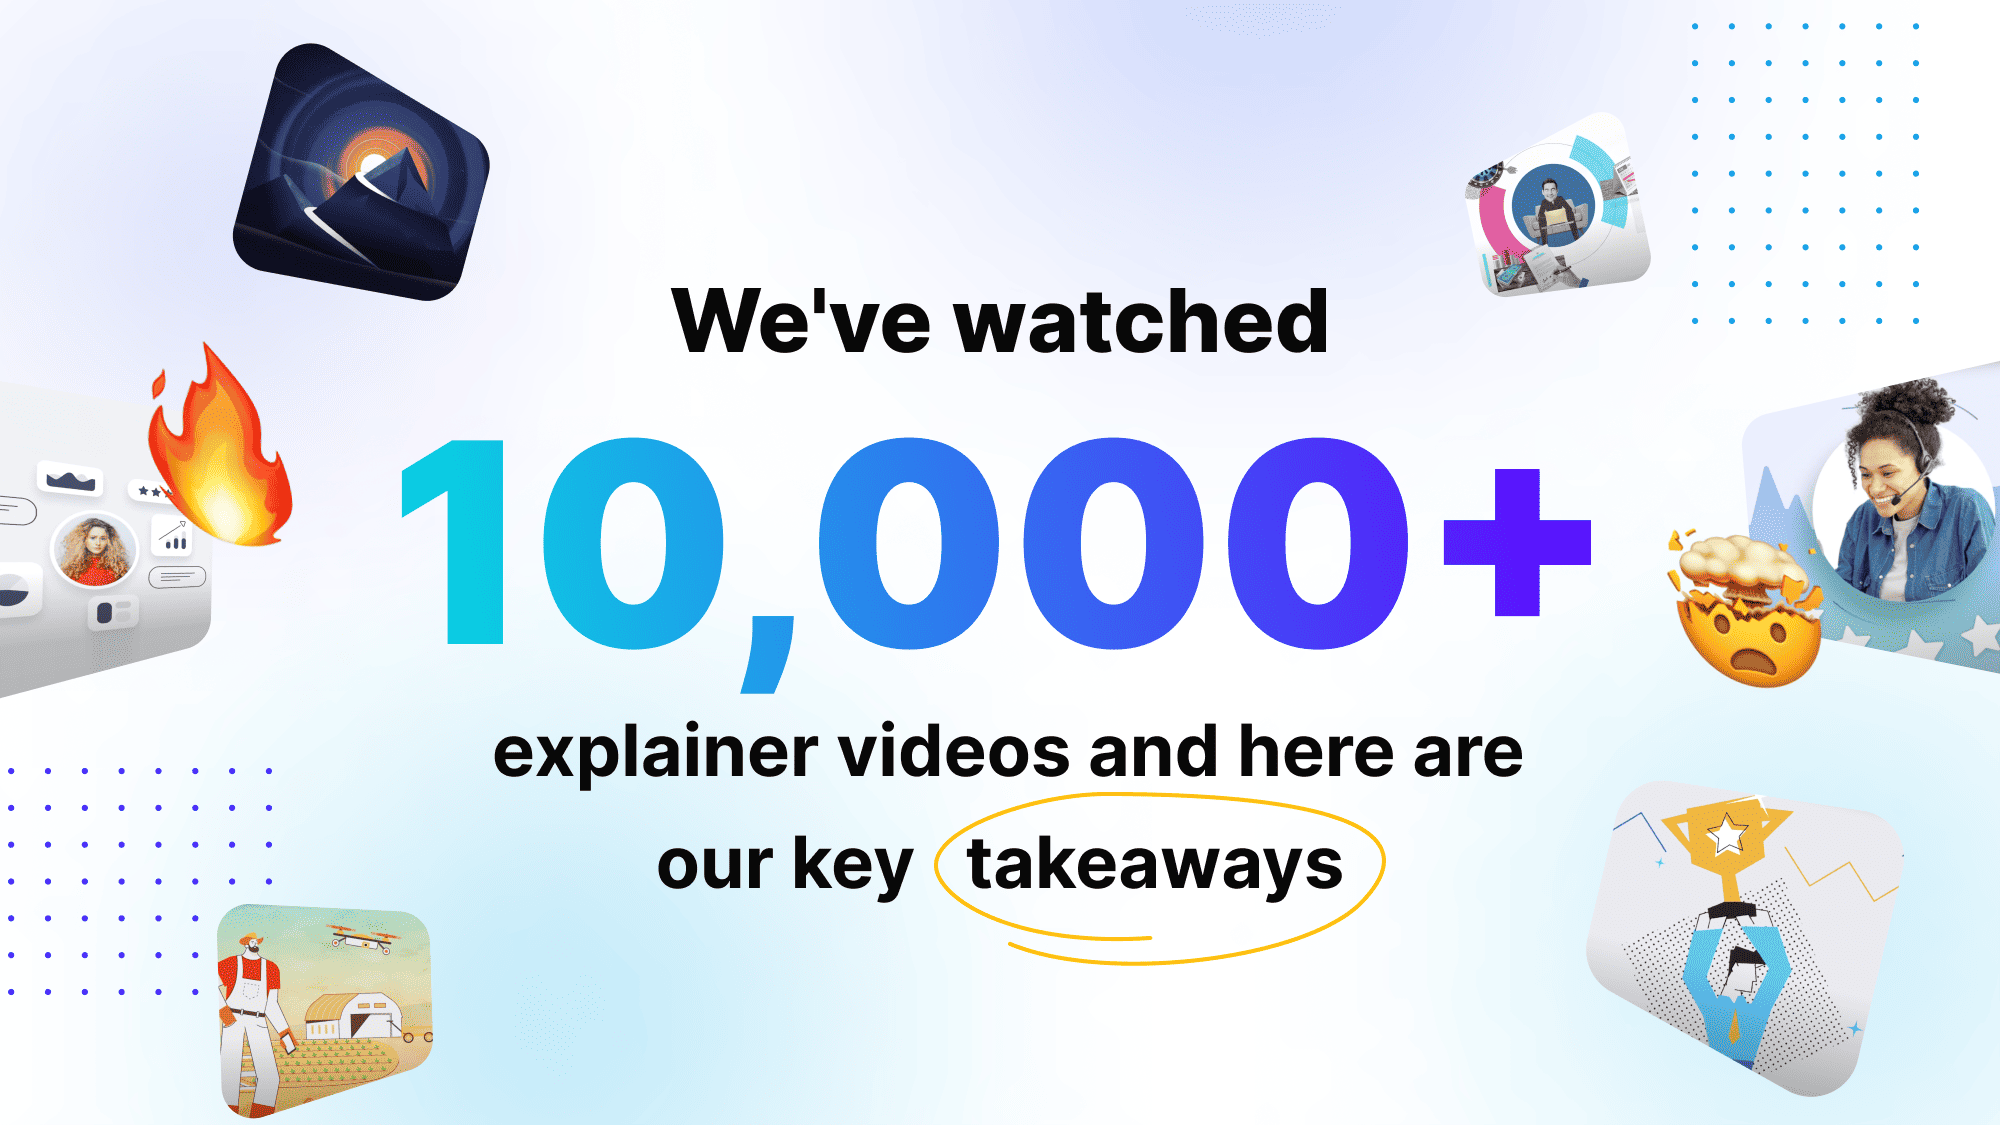 We've watched 10,000+ explainer videos, and now use our best insights to skyrocket your video campaigns.